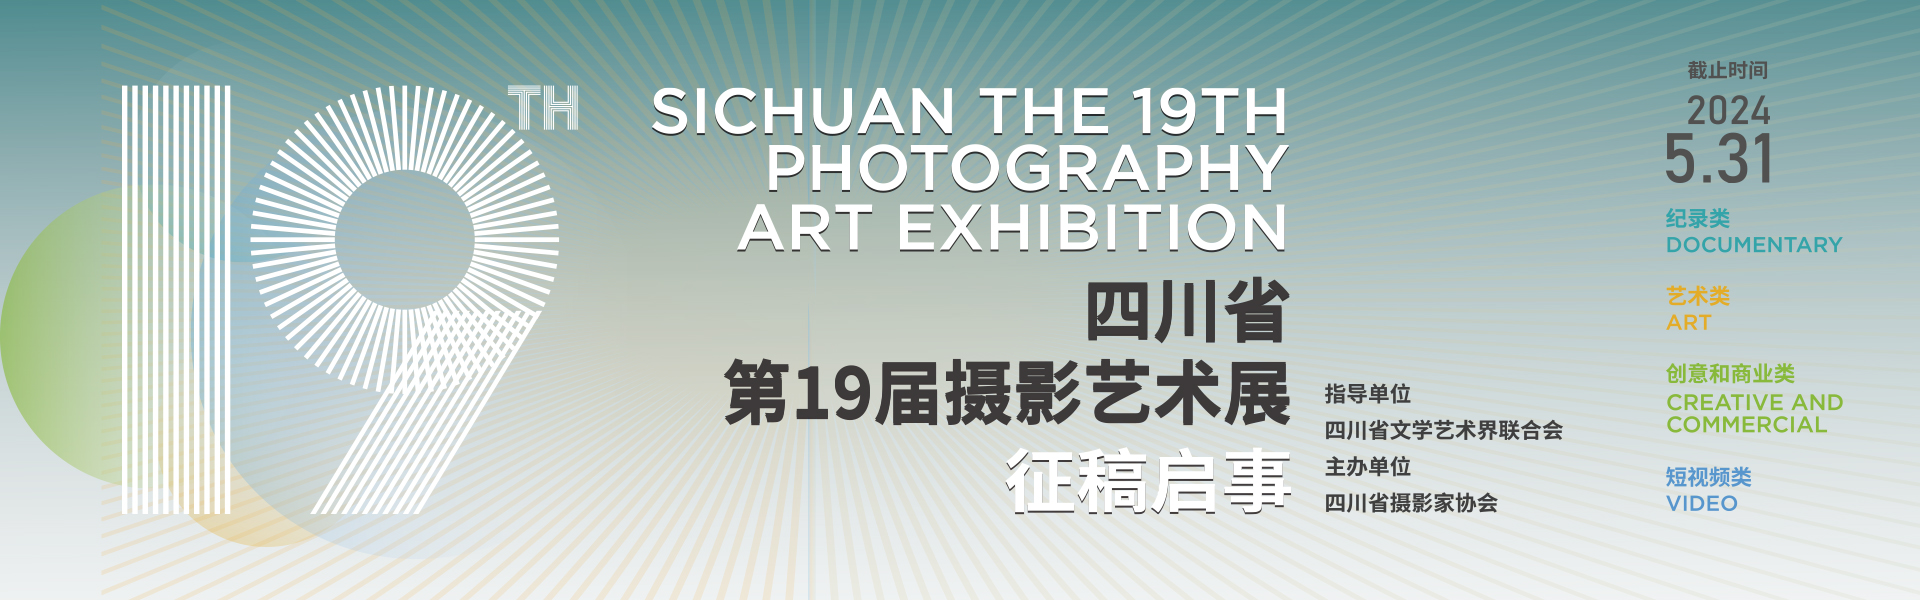  The 19th Sichuan Photography Art Exhibition